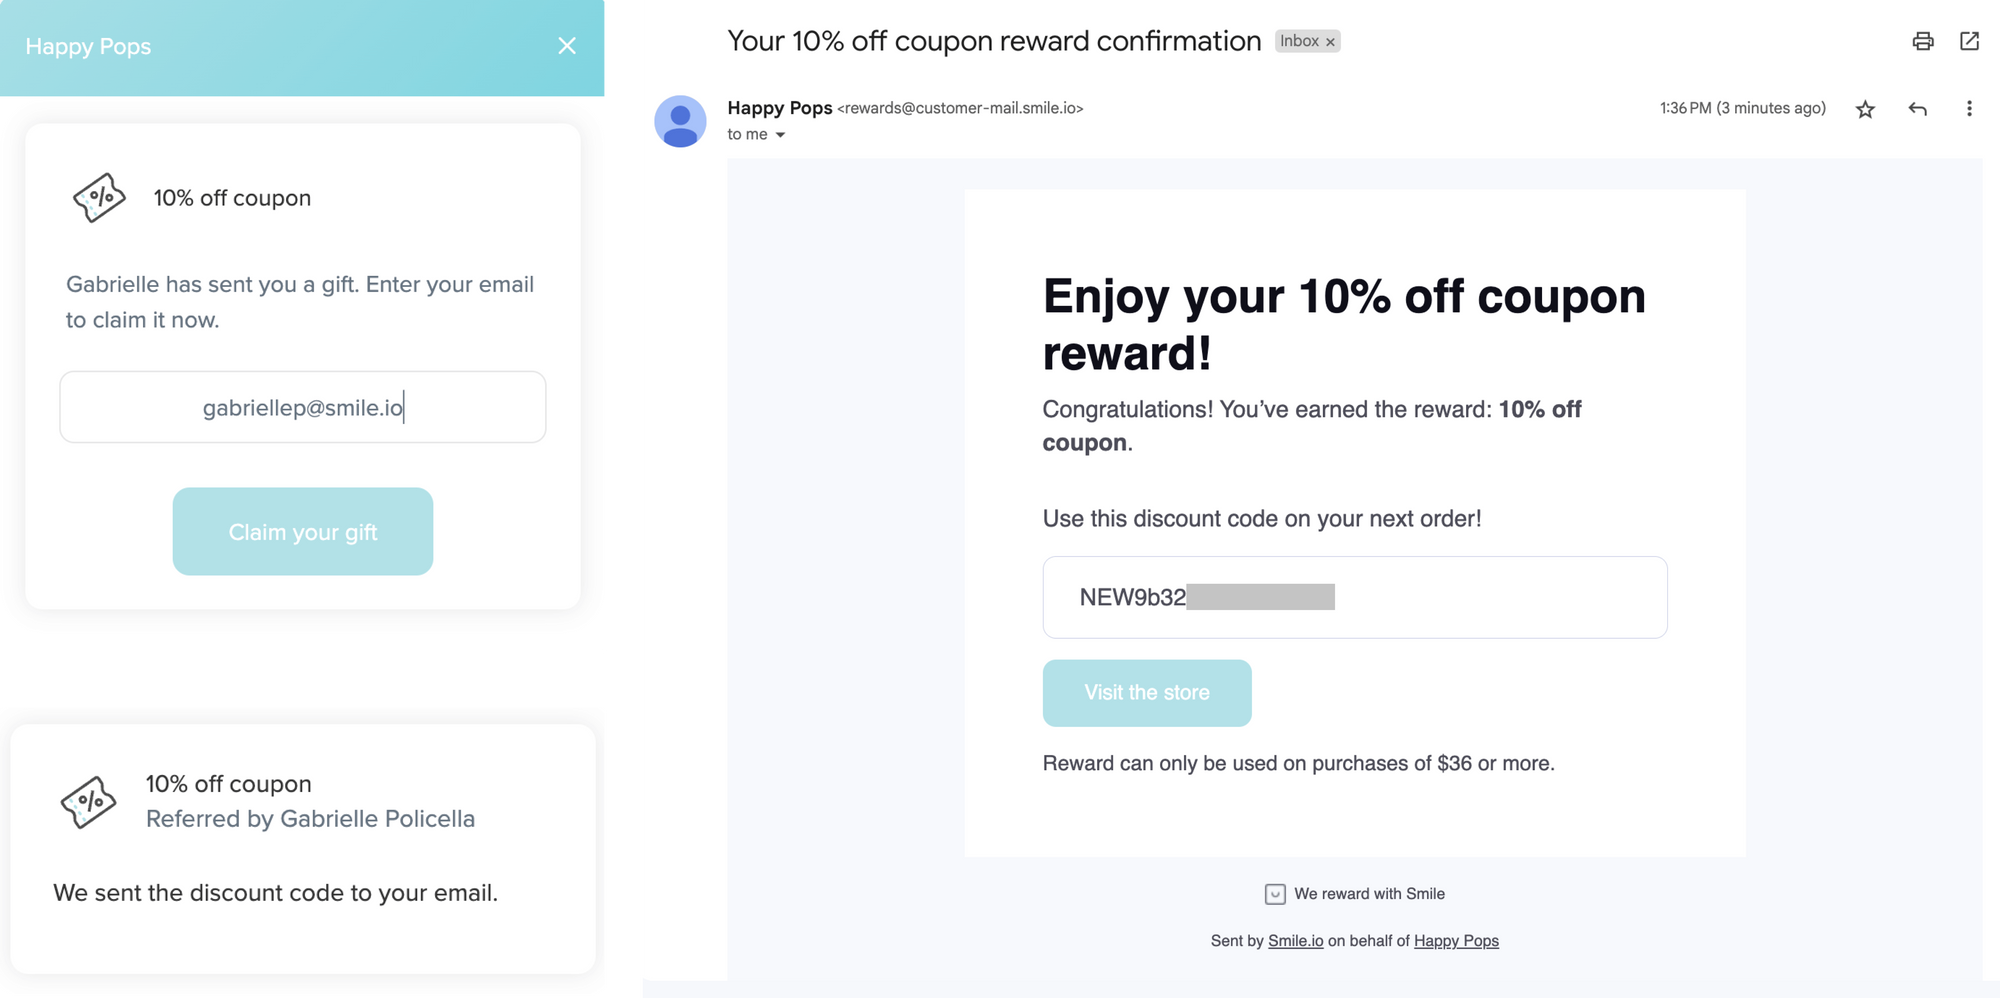 Referral Traffic into Purchases–A screenshot showing Happy Pops’ rewards panel with a customer entering their email to claim their reward. There is another screenshot beside that one showing an email titled, “Enjoy your 10% off coupon reward!” with the discount code the customer needs to redeem their reward. 